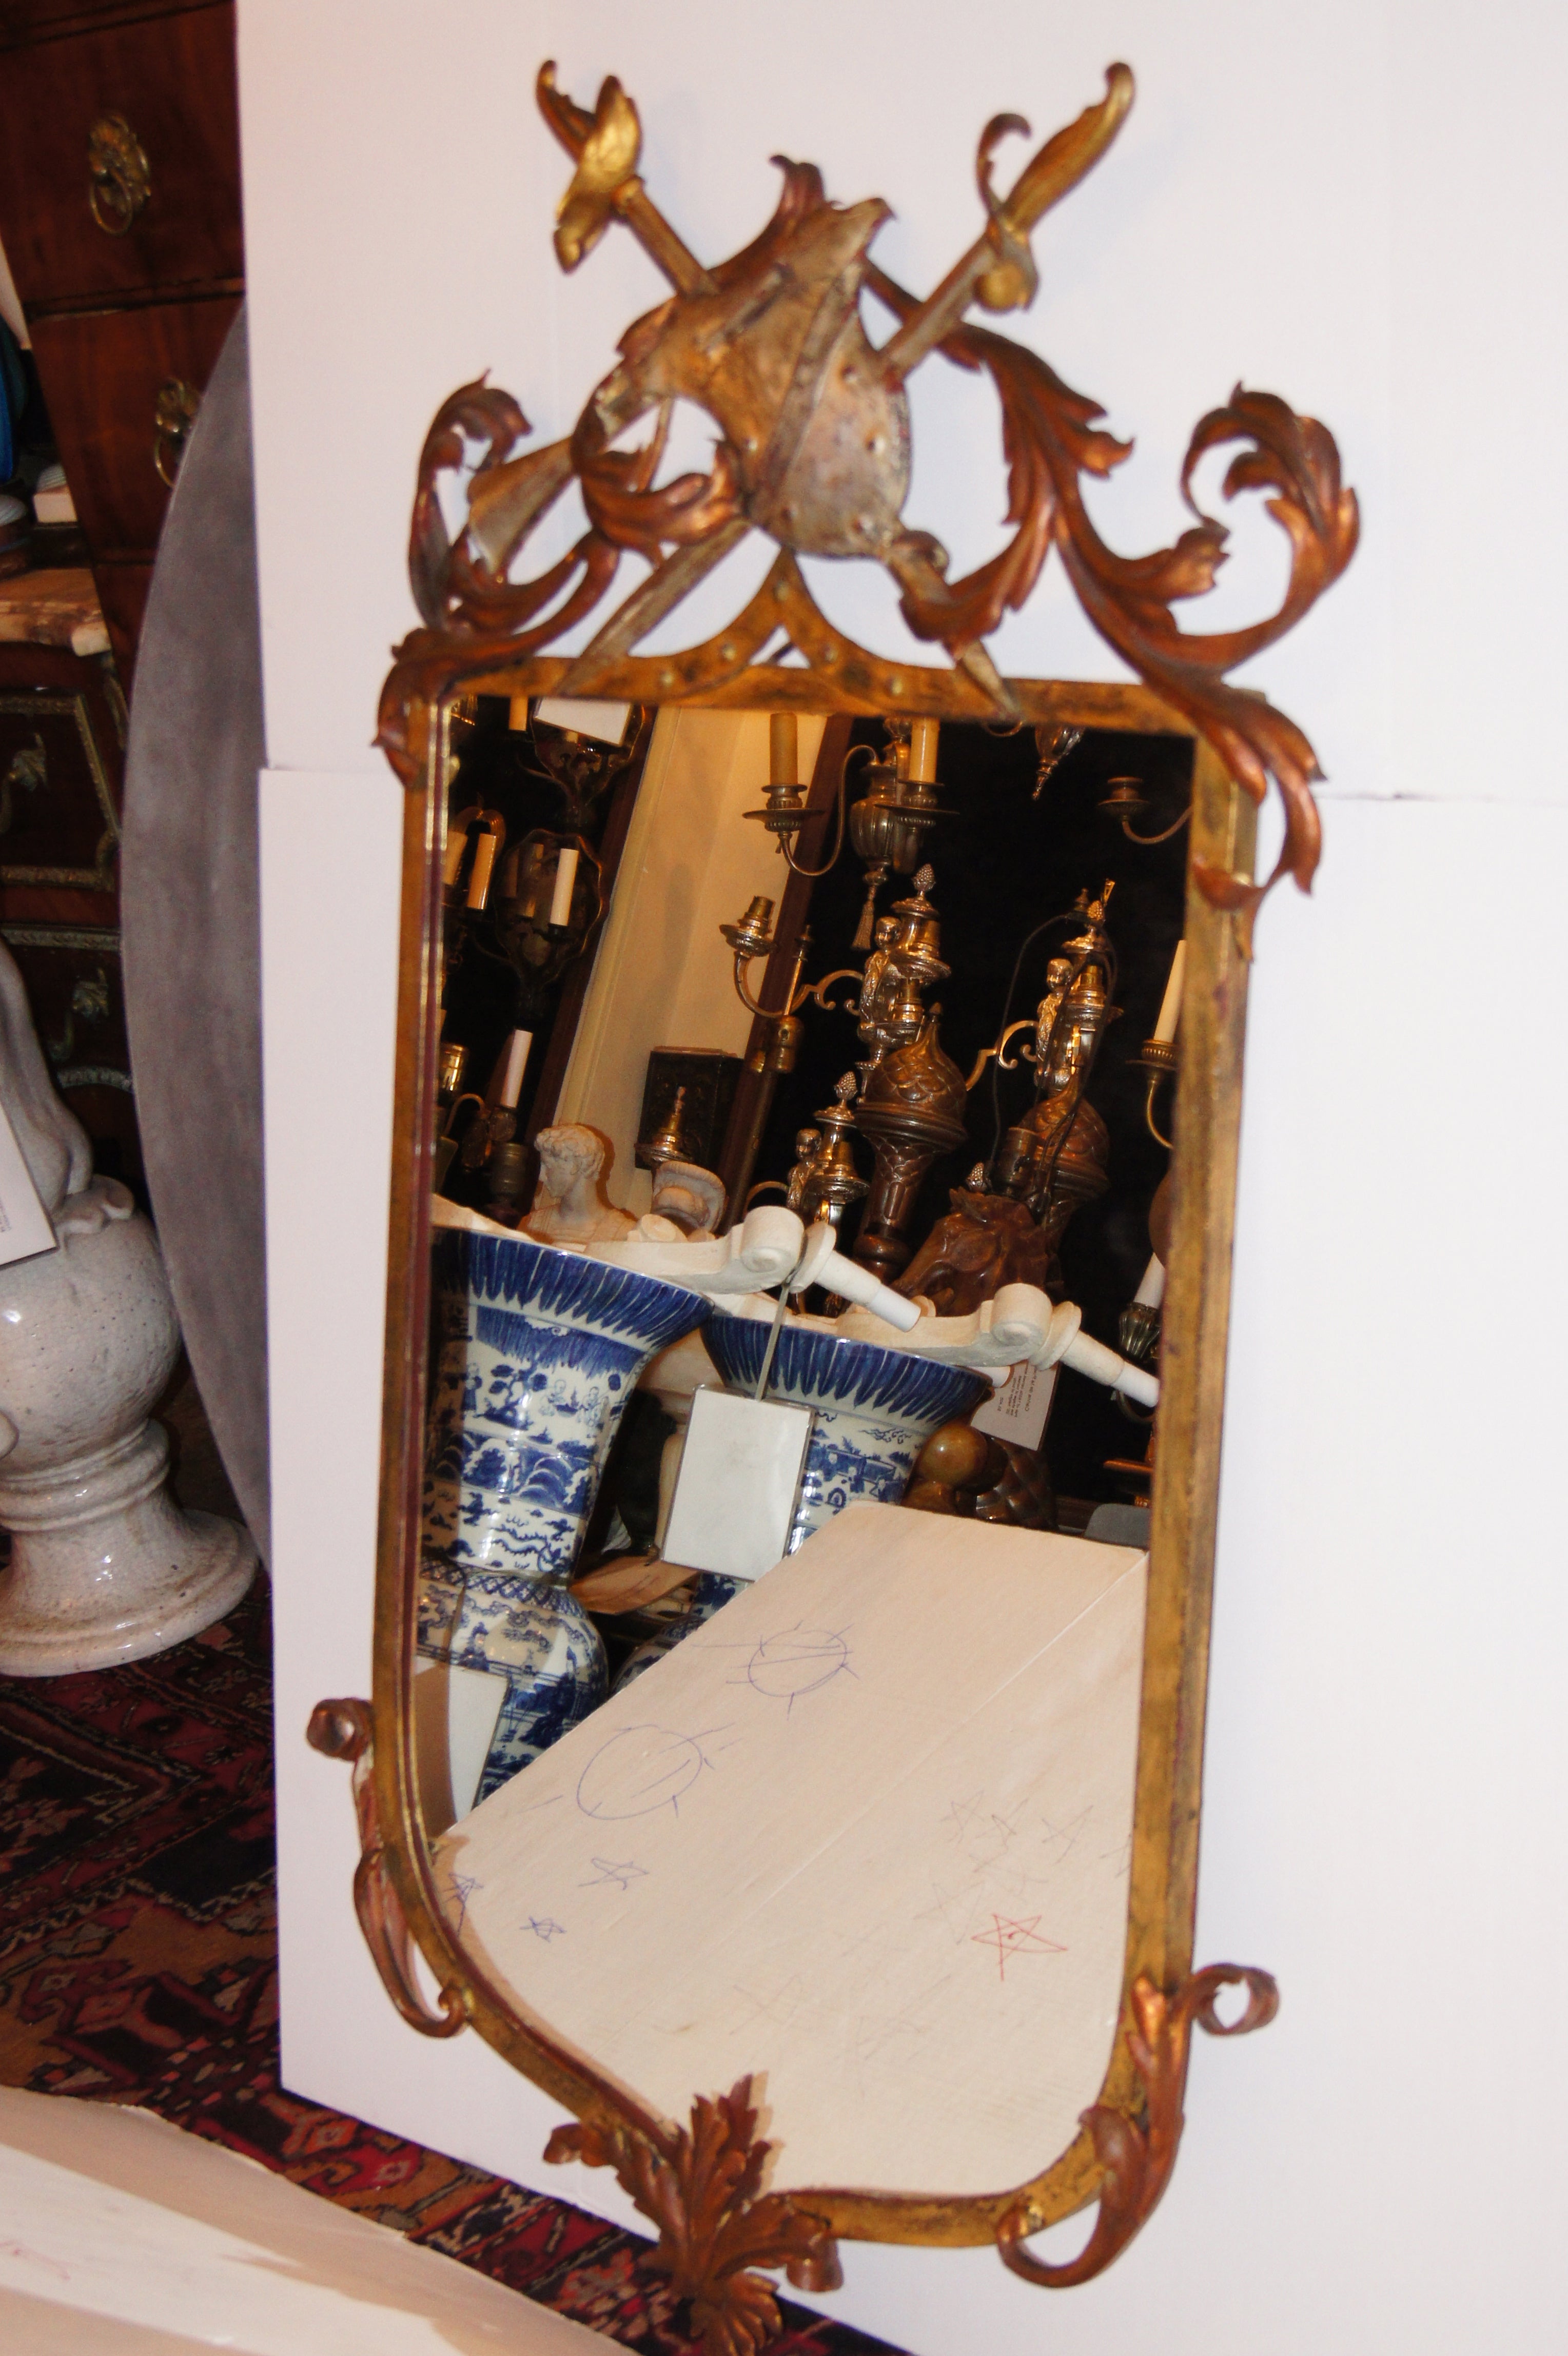 A circa 1940's Italian gilt and silver leaf metal mirror with armorial motif on crown and foliage decoration on frame.

Measurements:
Height: 55